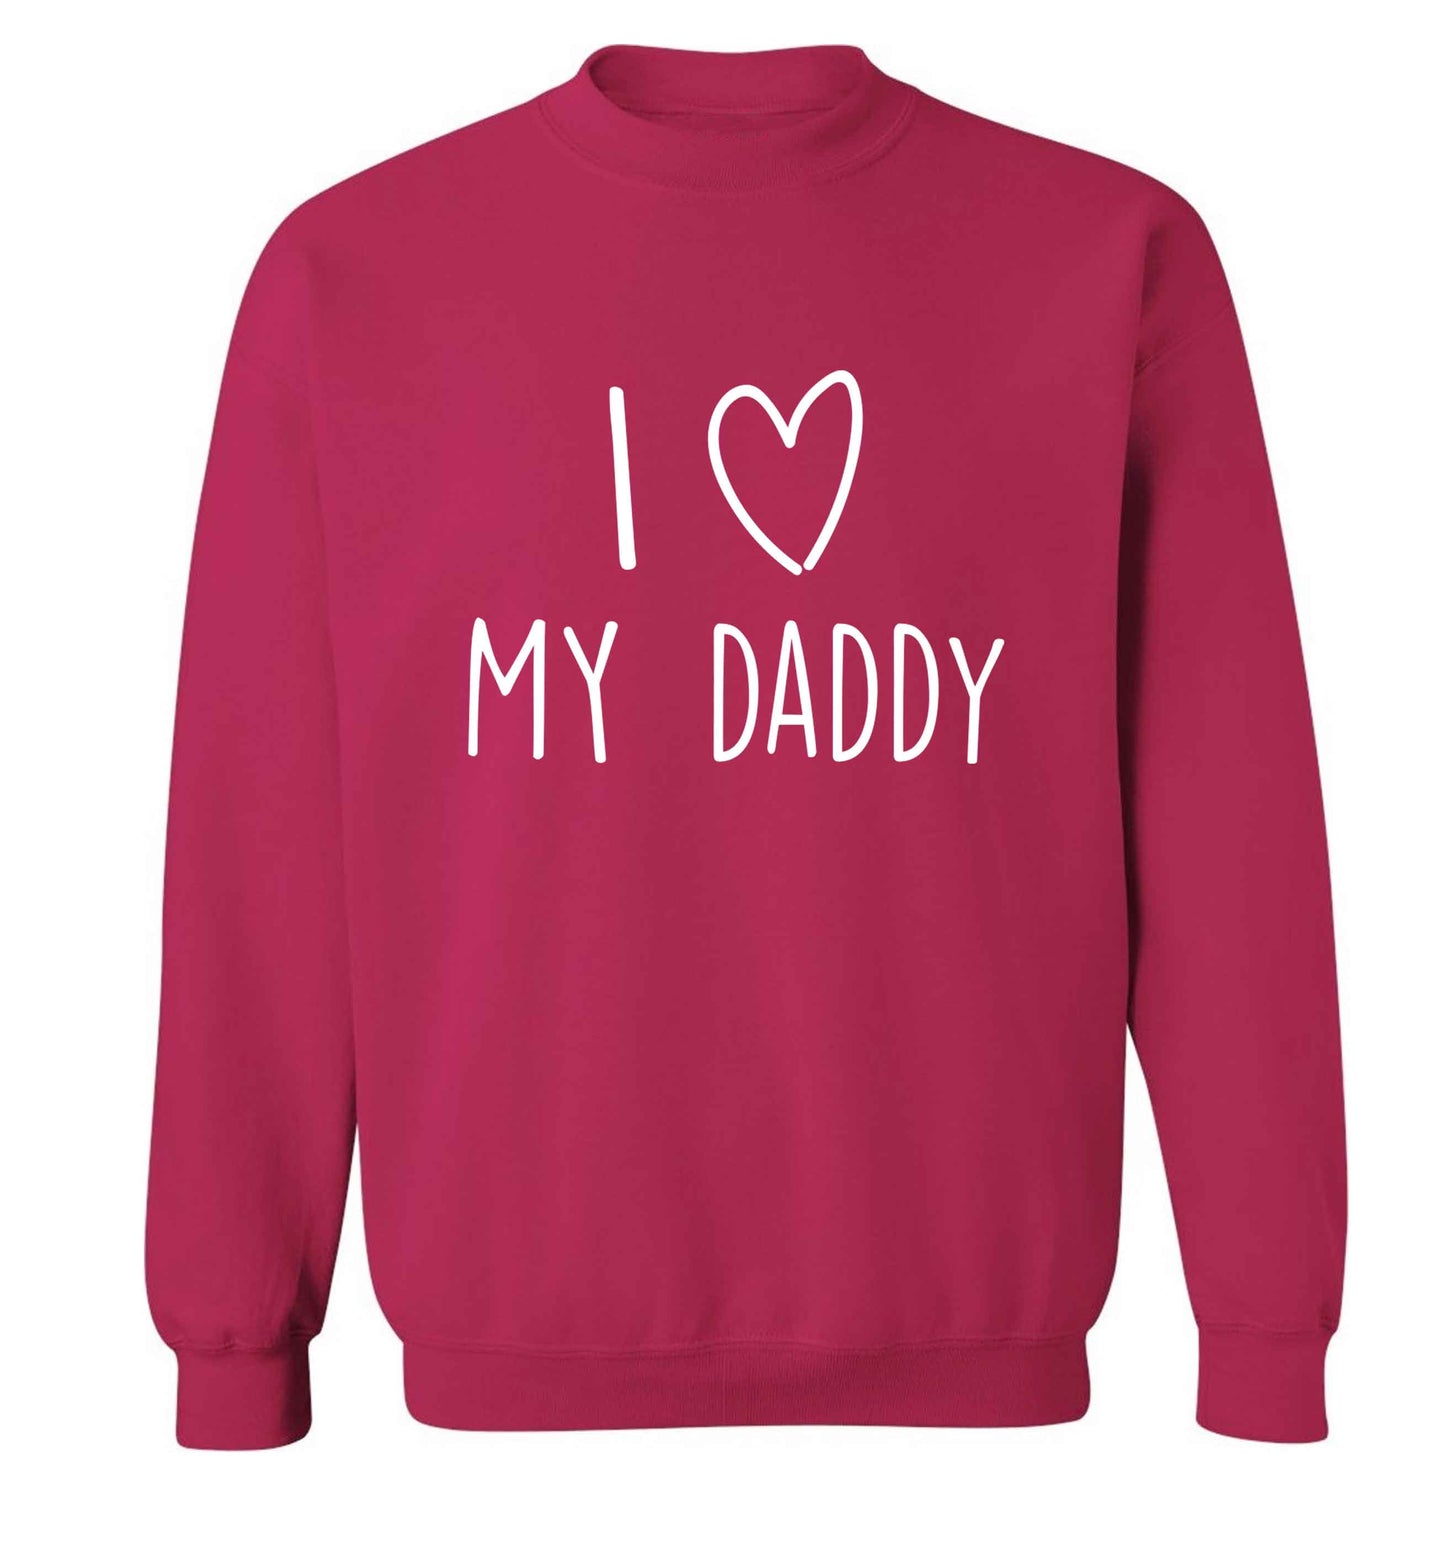 I love my daddy adult's unisex pink sweater 2XL